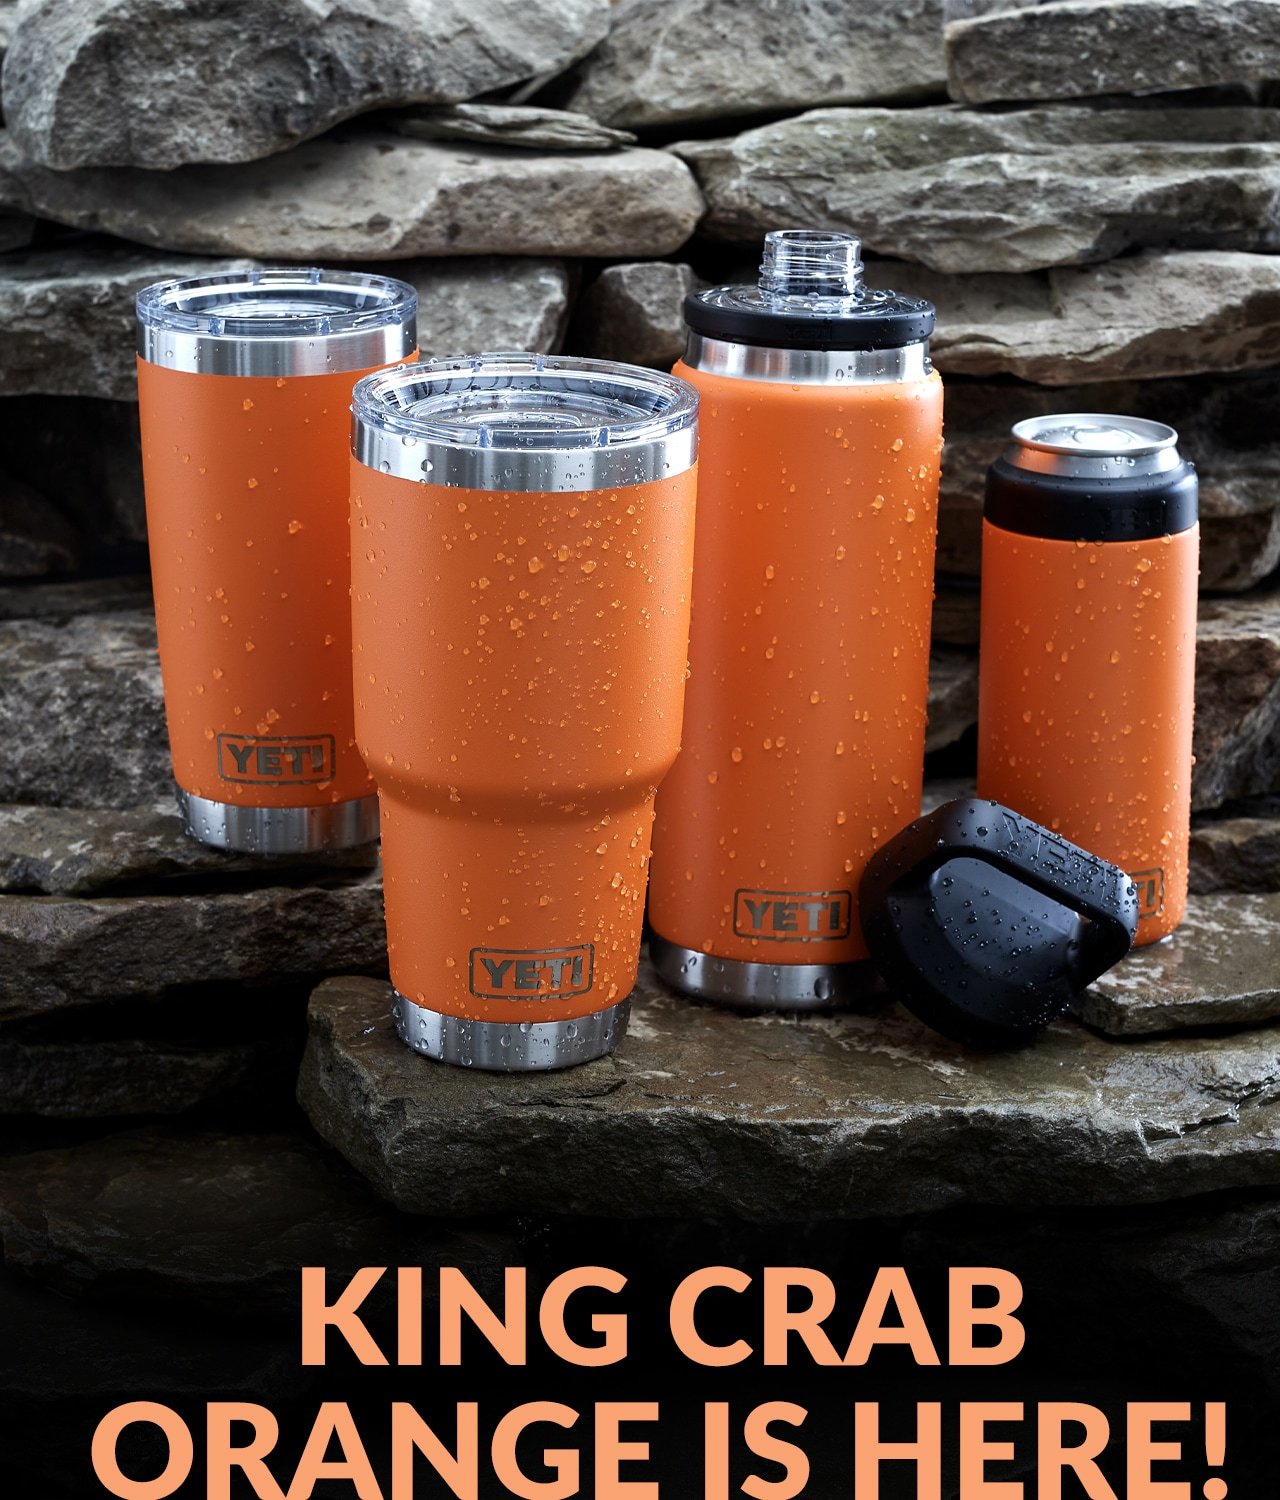 Field & Stream: New YETI King Crab Orange drinkware & coolers now available